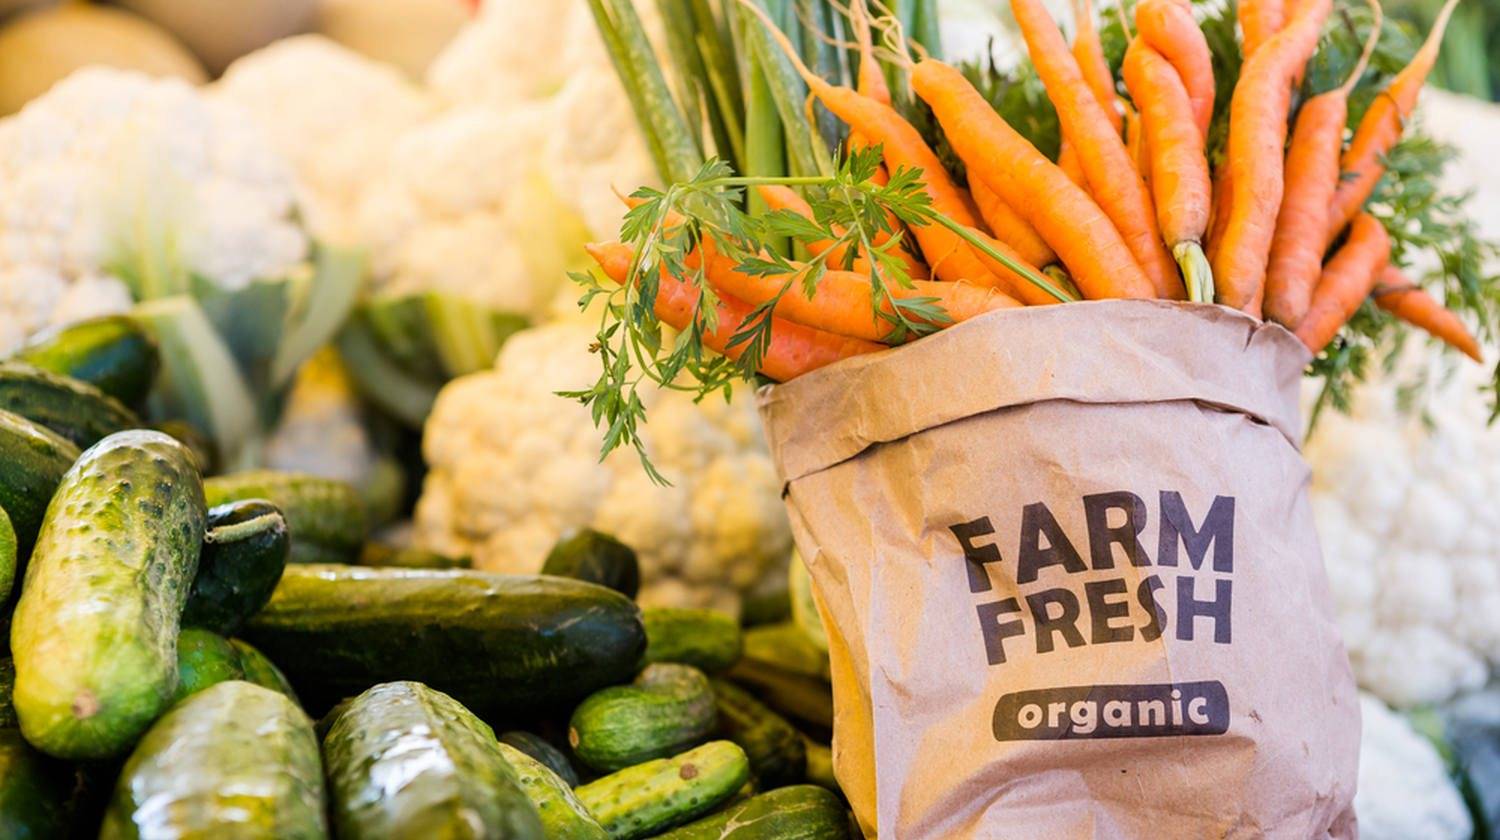 Featured | Fresh organic produce on sale at the local farmers market | Is Organic Food Worth It? Benefits of Eating Organic Foods